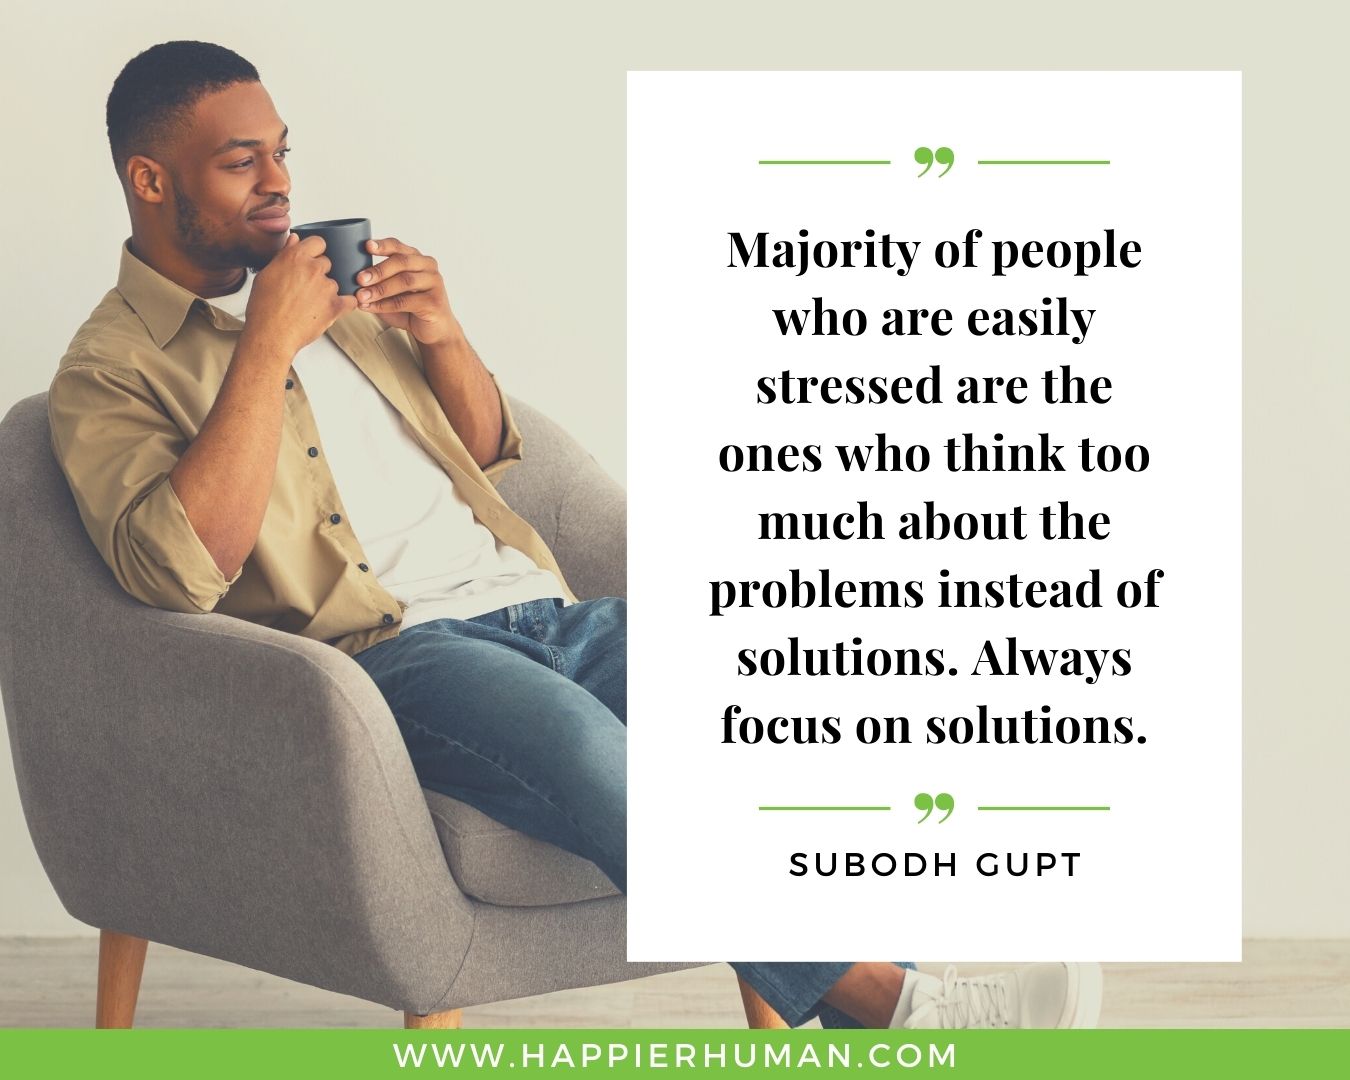 Overthinking Quotes - “Majority of people who are easily stressed are the ones who think too much about the problems instead of solutions. Always focus on solutions.” – Subodh Gupt